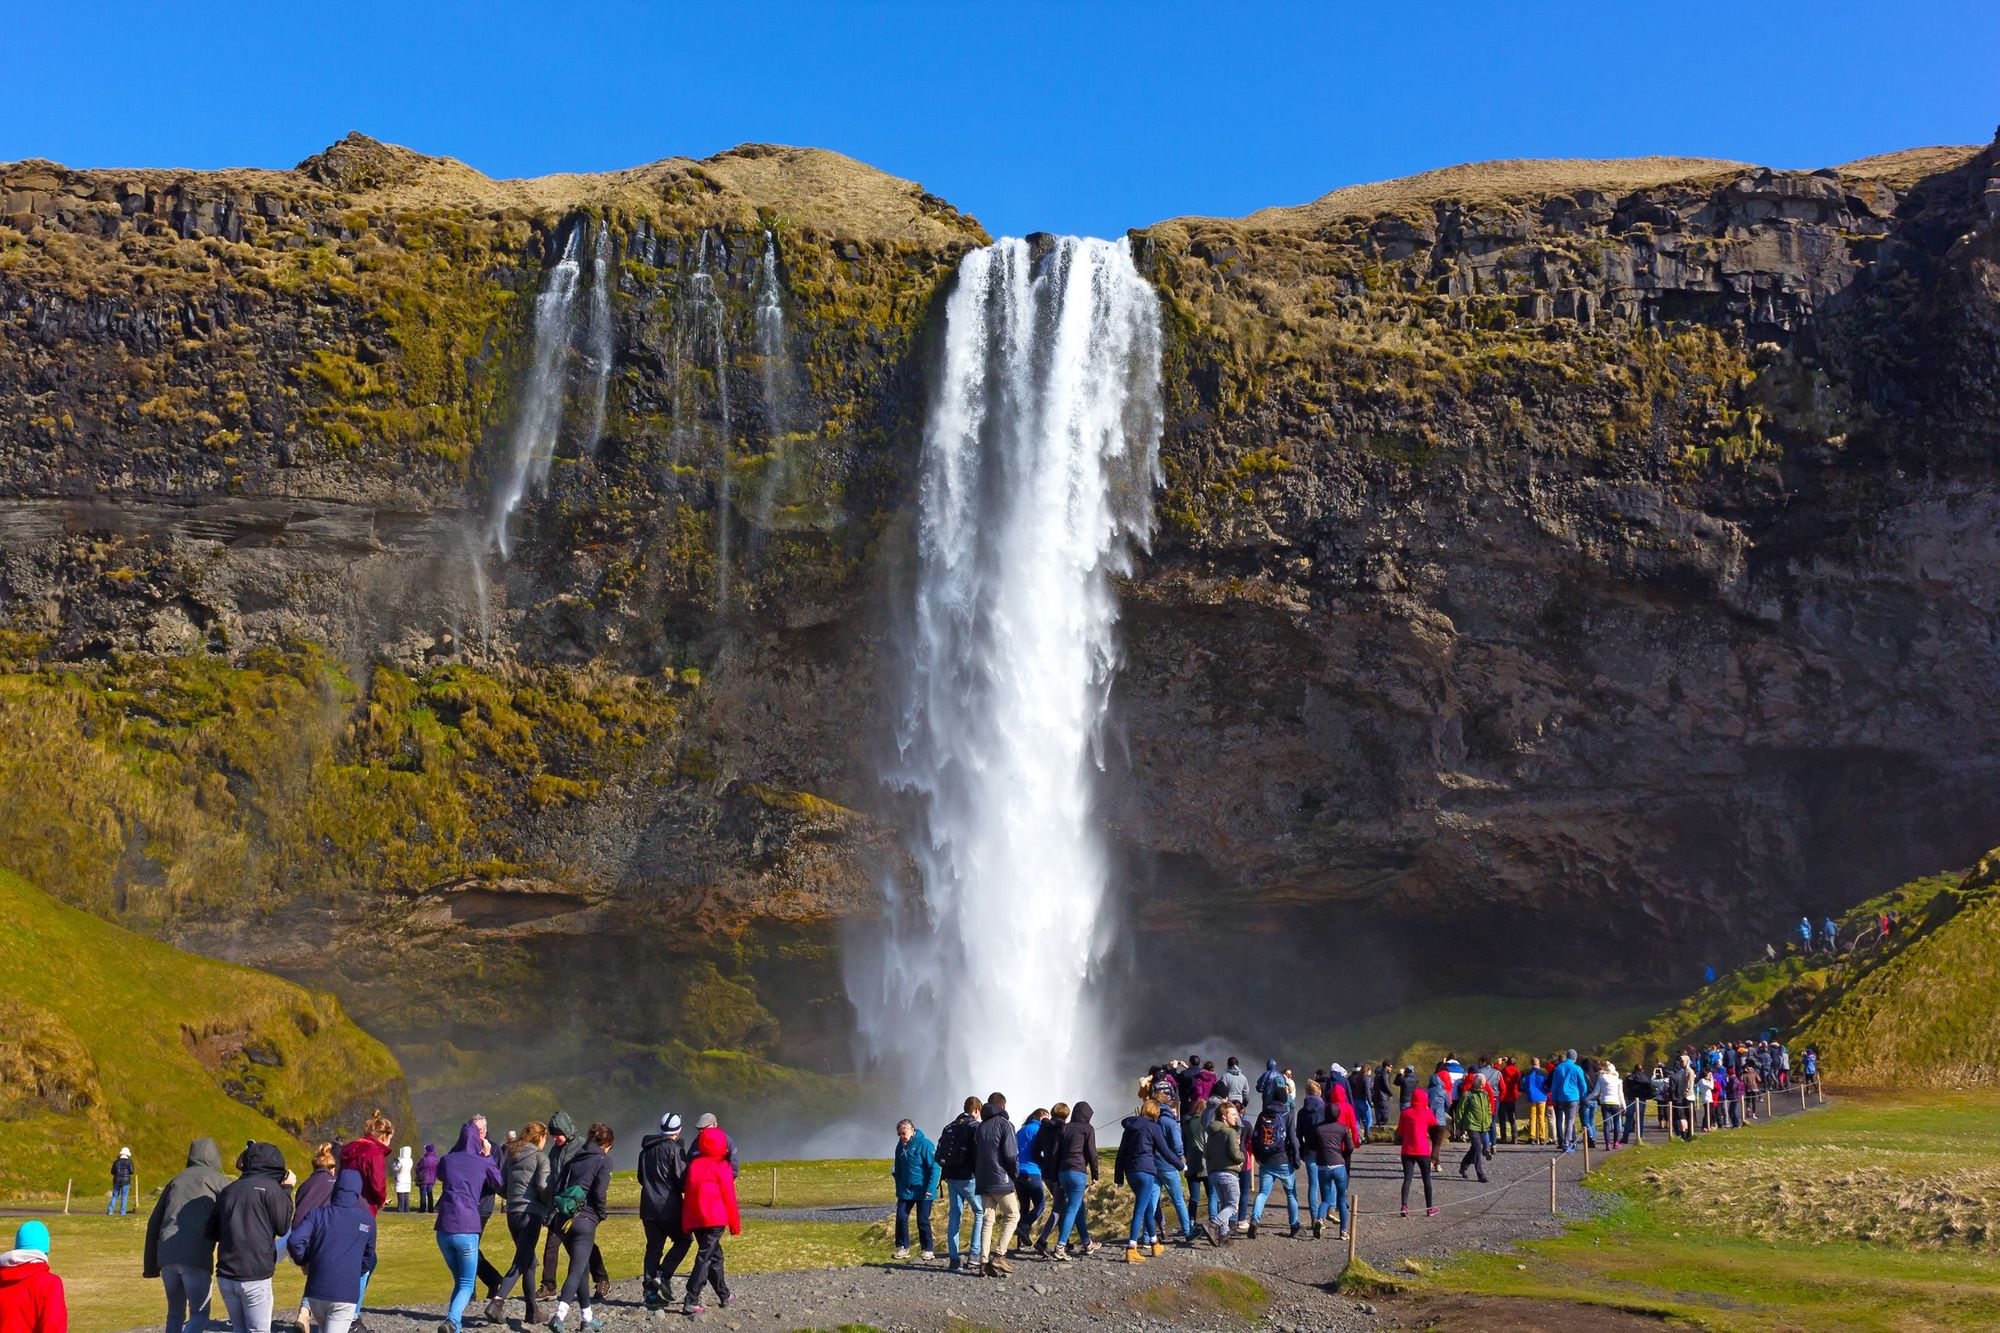 Crowds flock to the Skógafoss waterfall in the south of Iceland. Photo: Getty